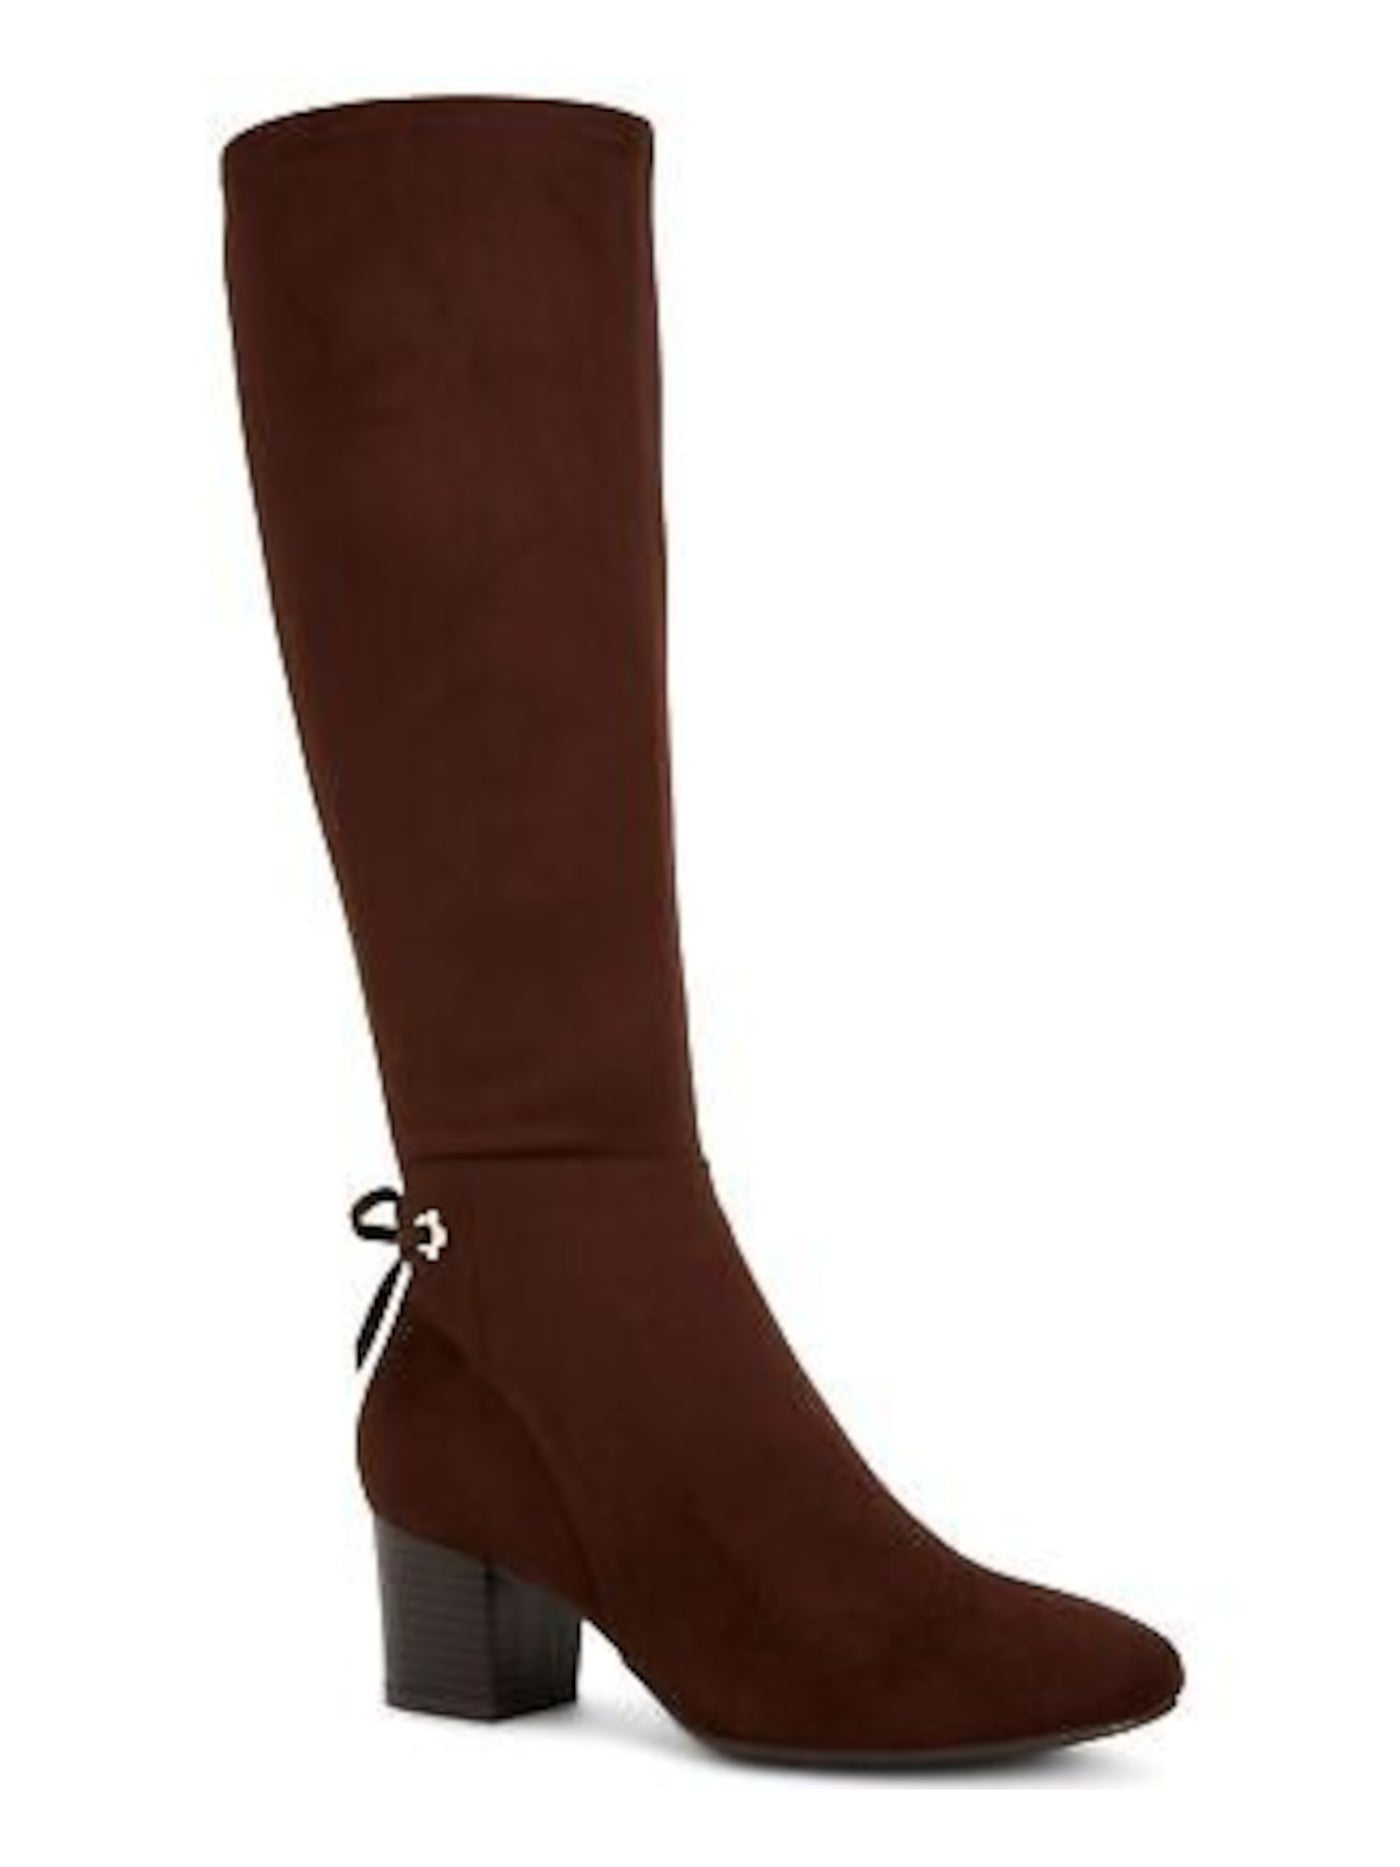 CHARTER CLUB Womens Chocolate Brown Flower Grommets Bow Accent Padded Jaccque Almond Toe Block Heel Zip-Up Boots Shoes 6 M